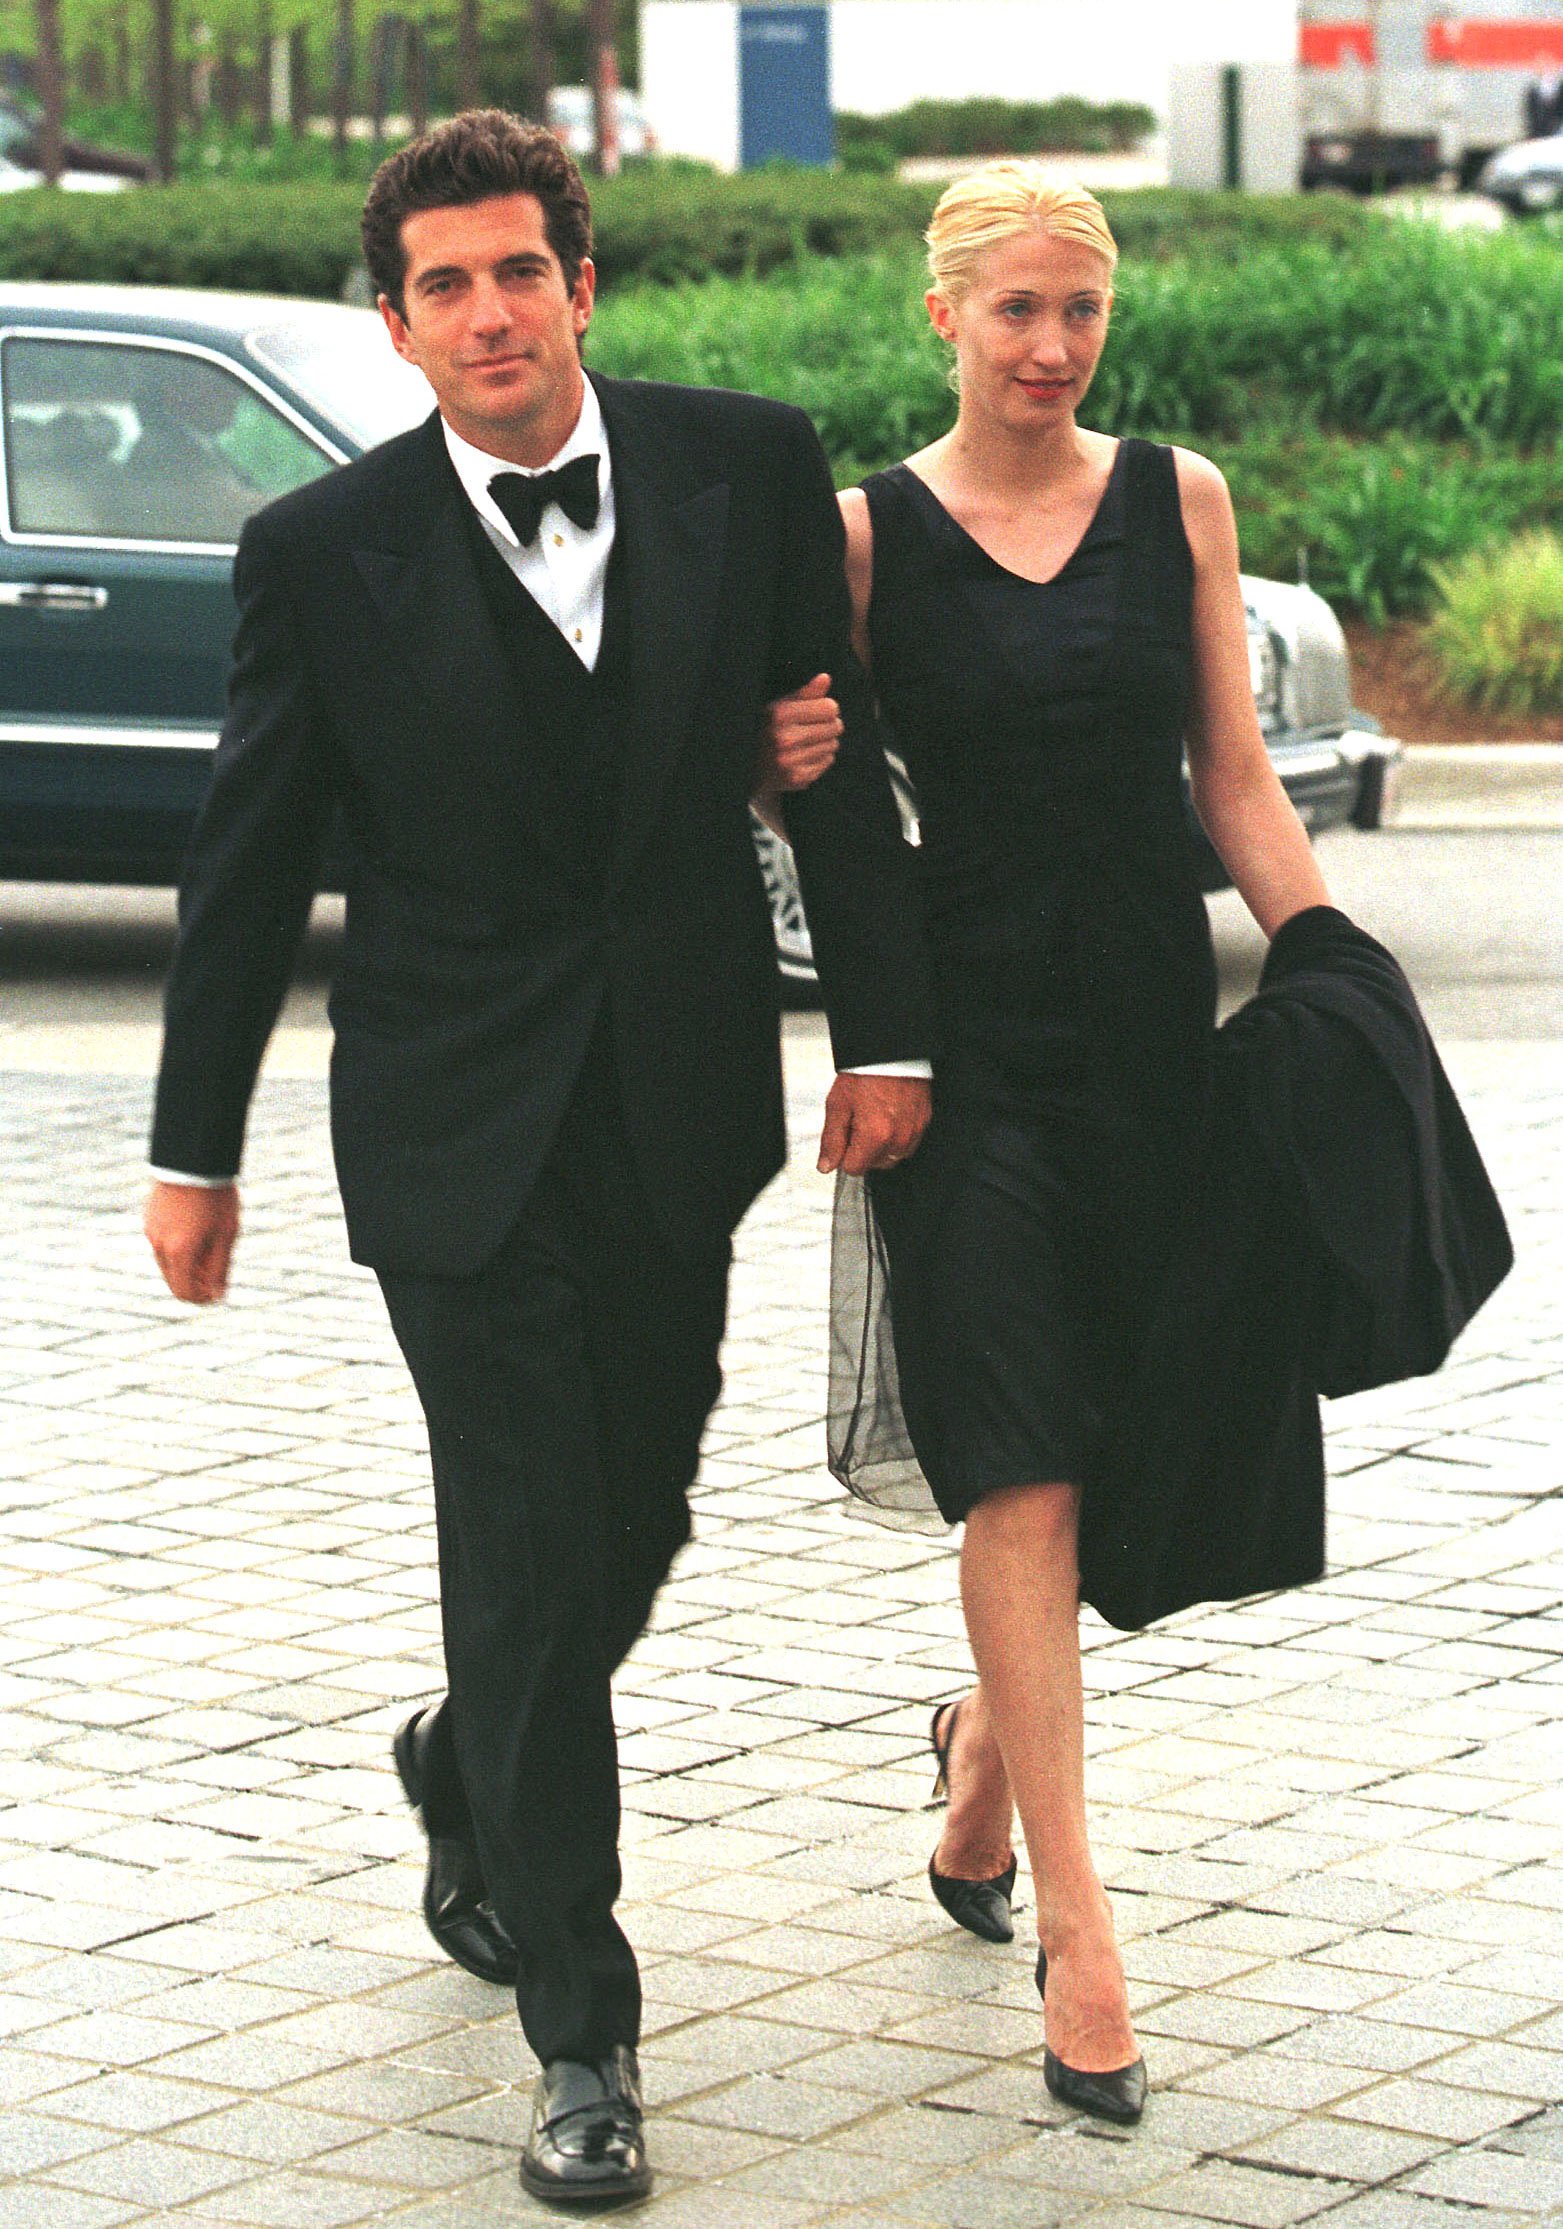 John F. Kennedy Jr. and his wife Carolyn Bessette Kennedy pictured arriving for the reception ceremony. / Source: Getty Images